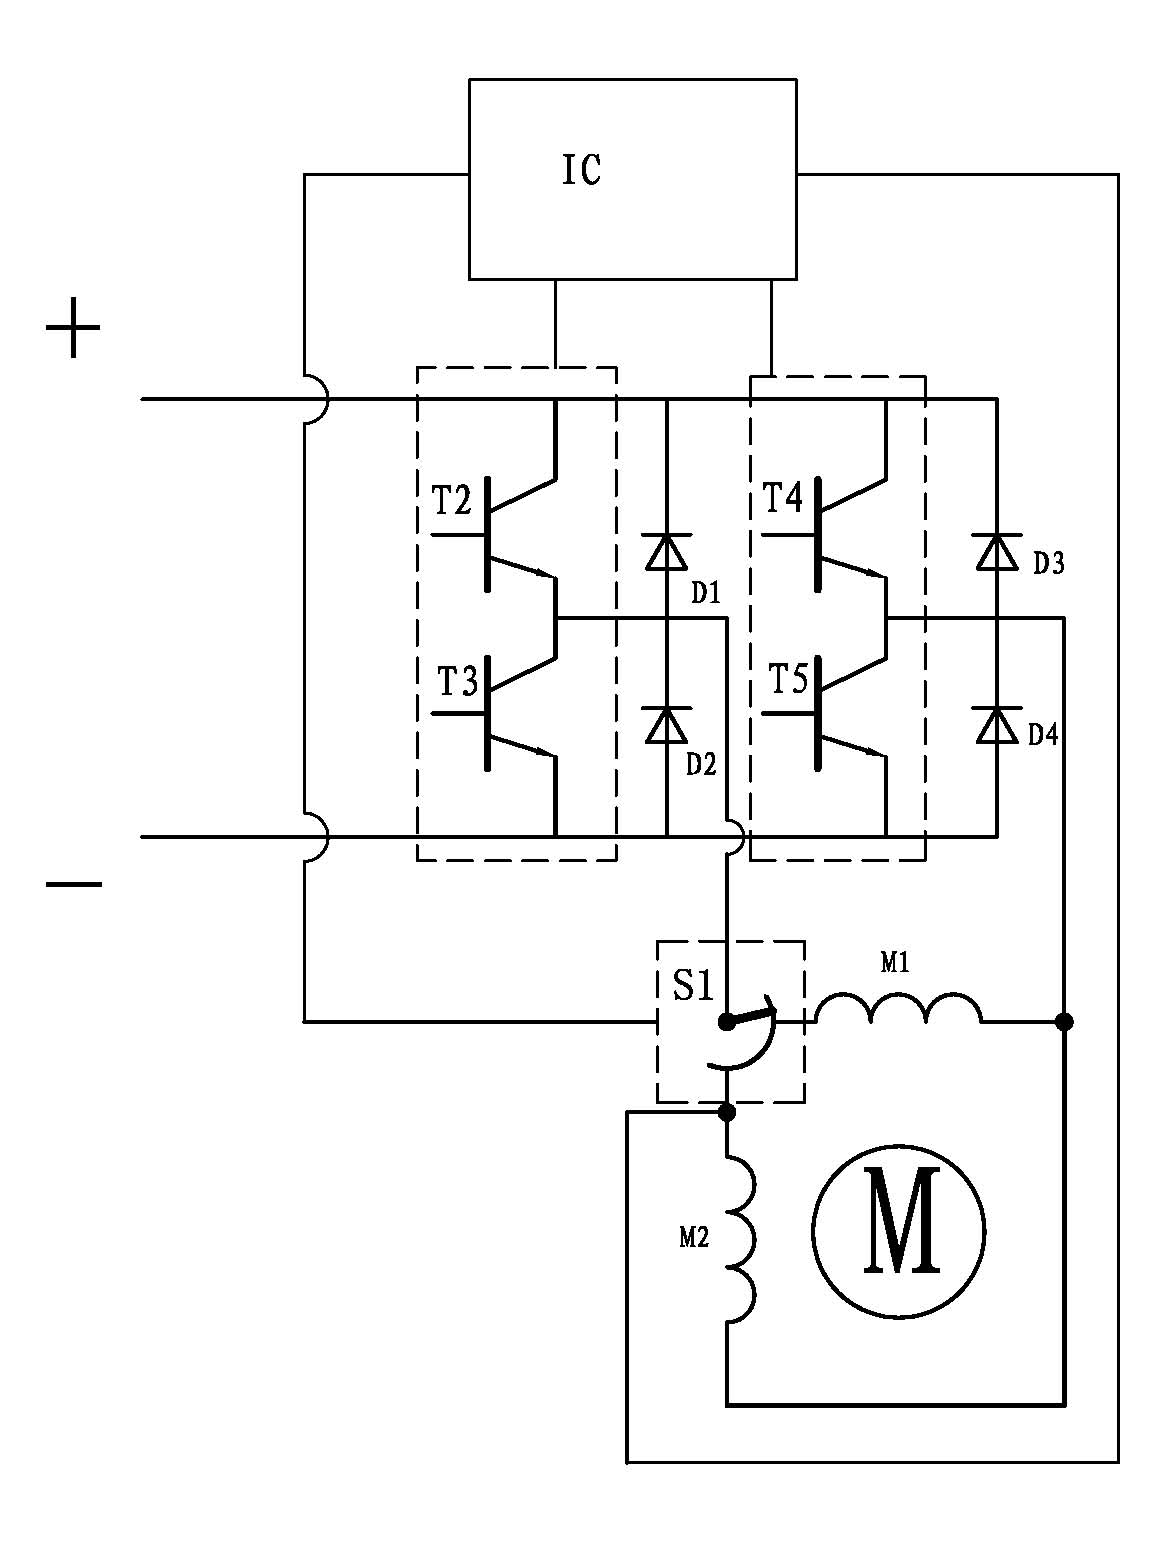 A permanent magnet two-phase brushless divided stator motor